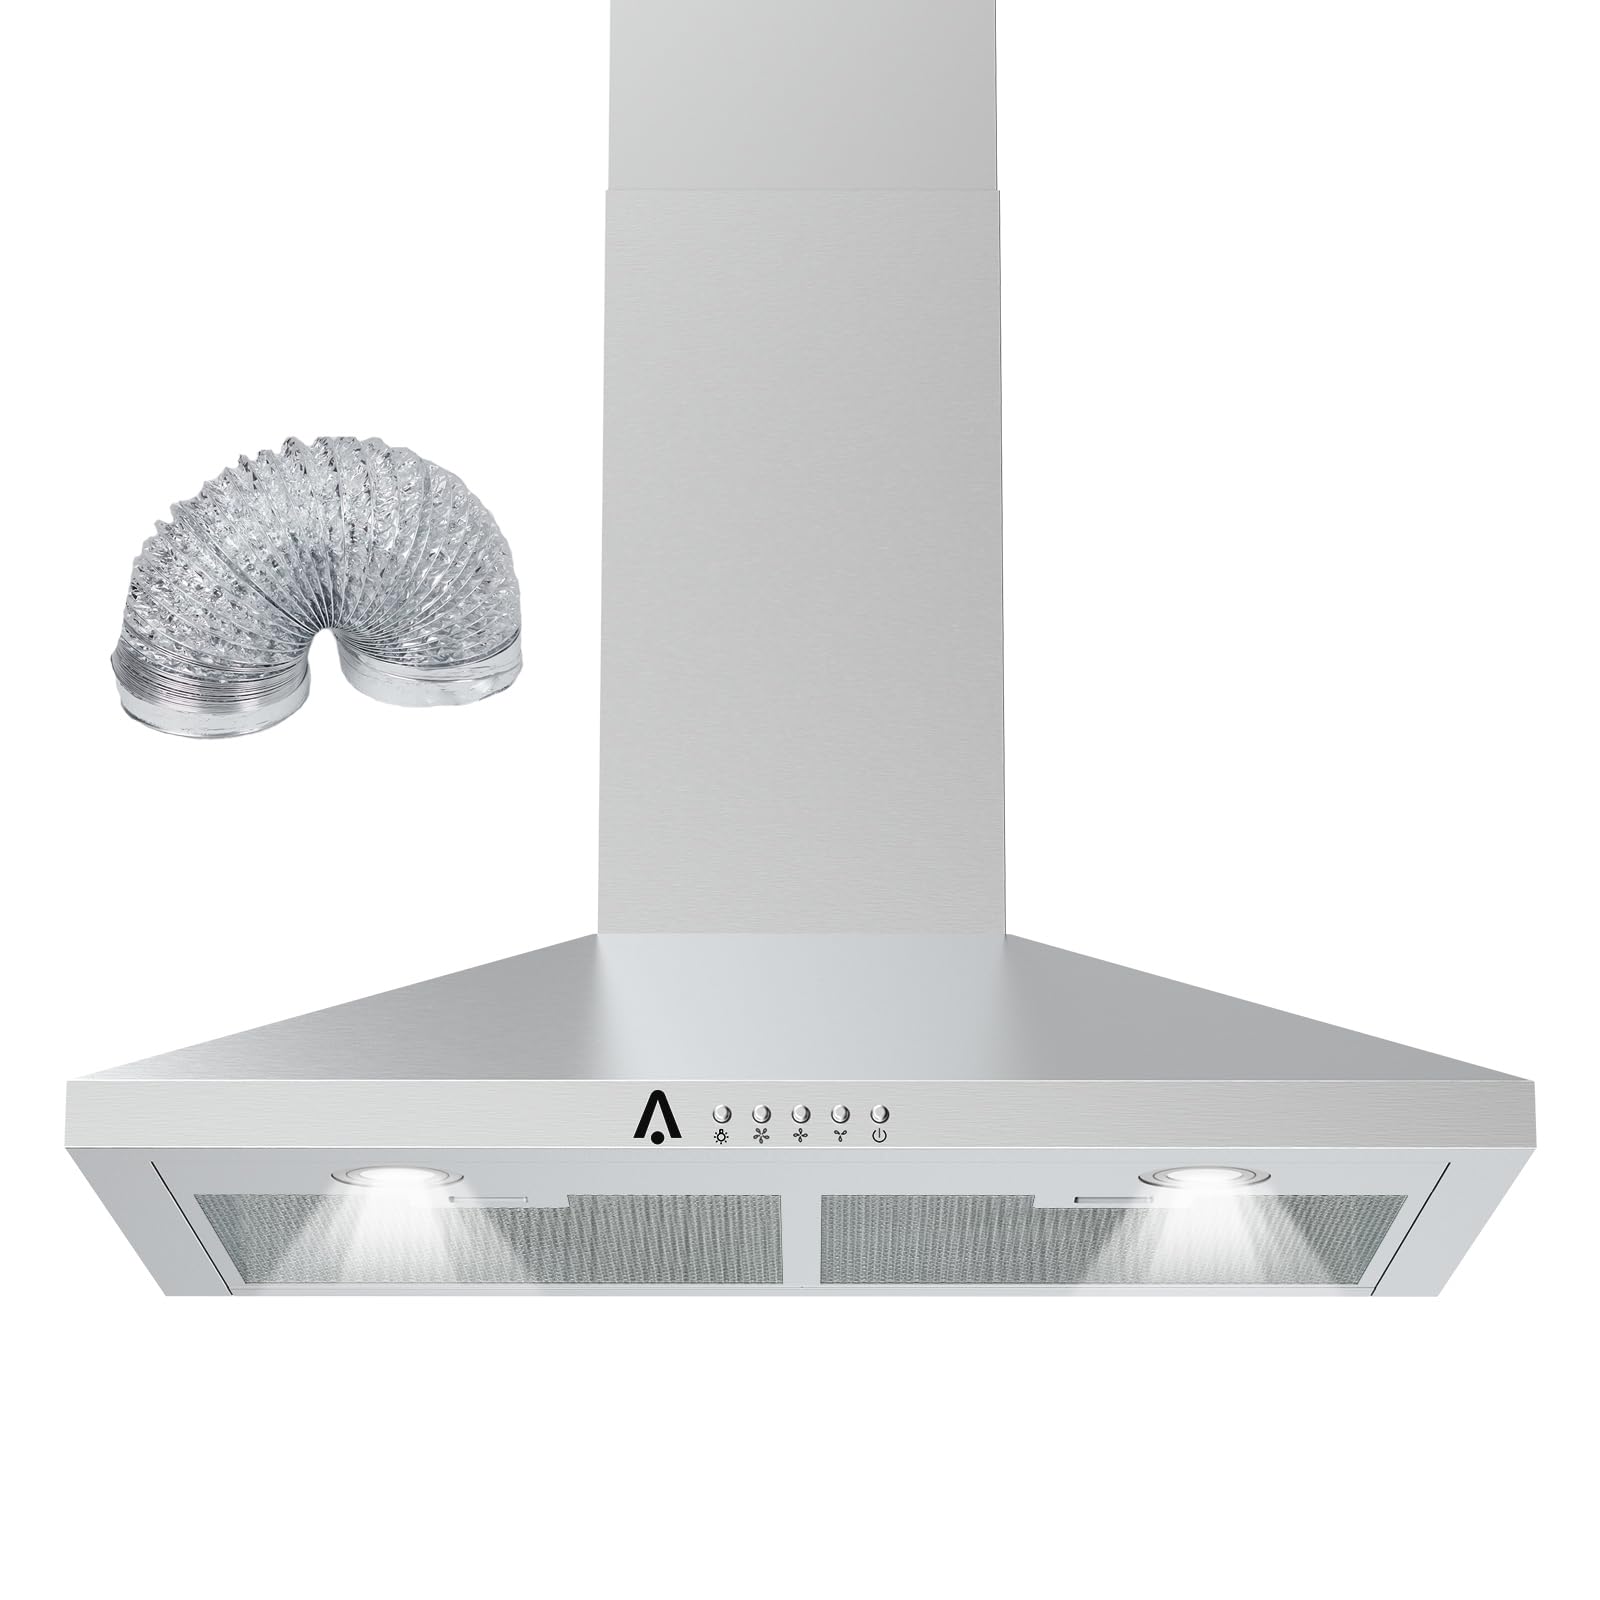 Aprafie Kitchen Hood, Wall Mount Range Hood 30 inch with 2m Ventilation Duct and 5-Layer Aluminum Permanent Filters Ductless/Ducted Convertible for Stove Kitchen